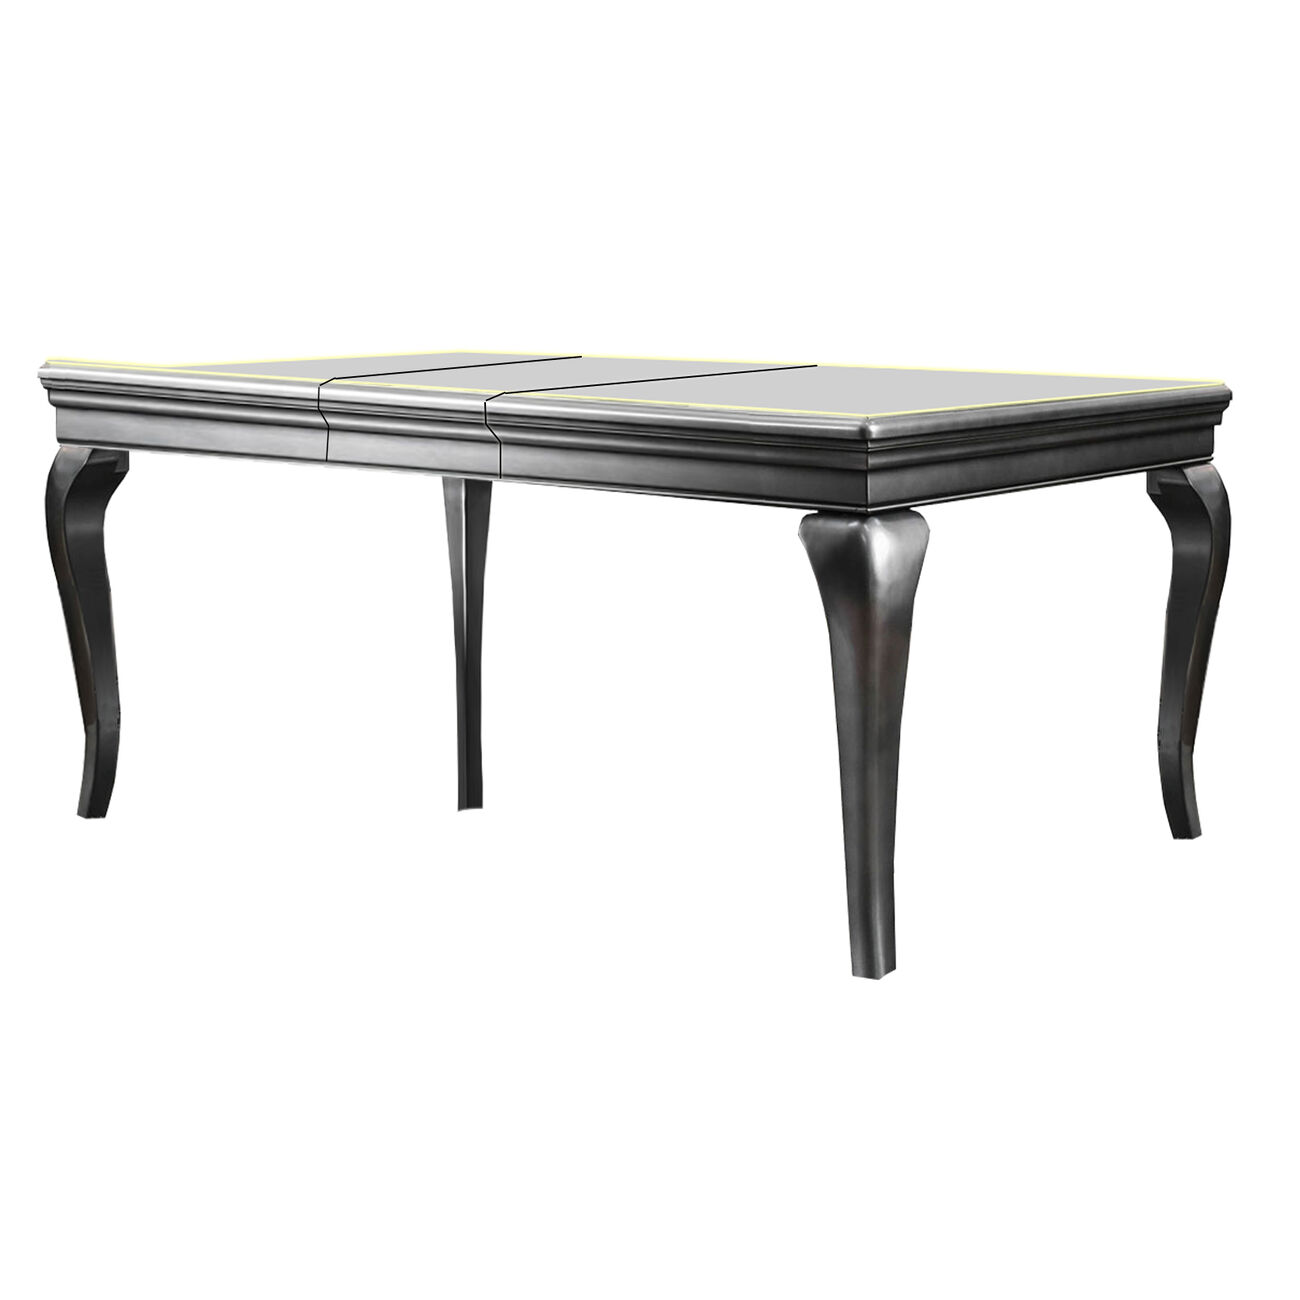 Wood and Mirror Dining Table with Extendable Leaf, Gray and Silver